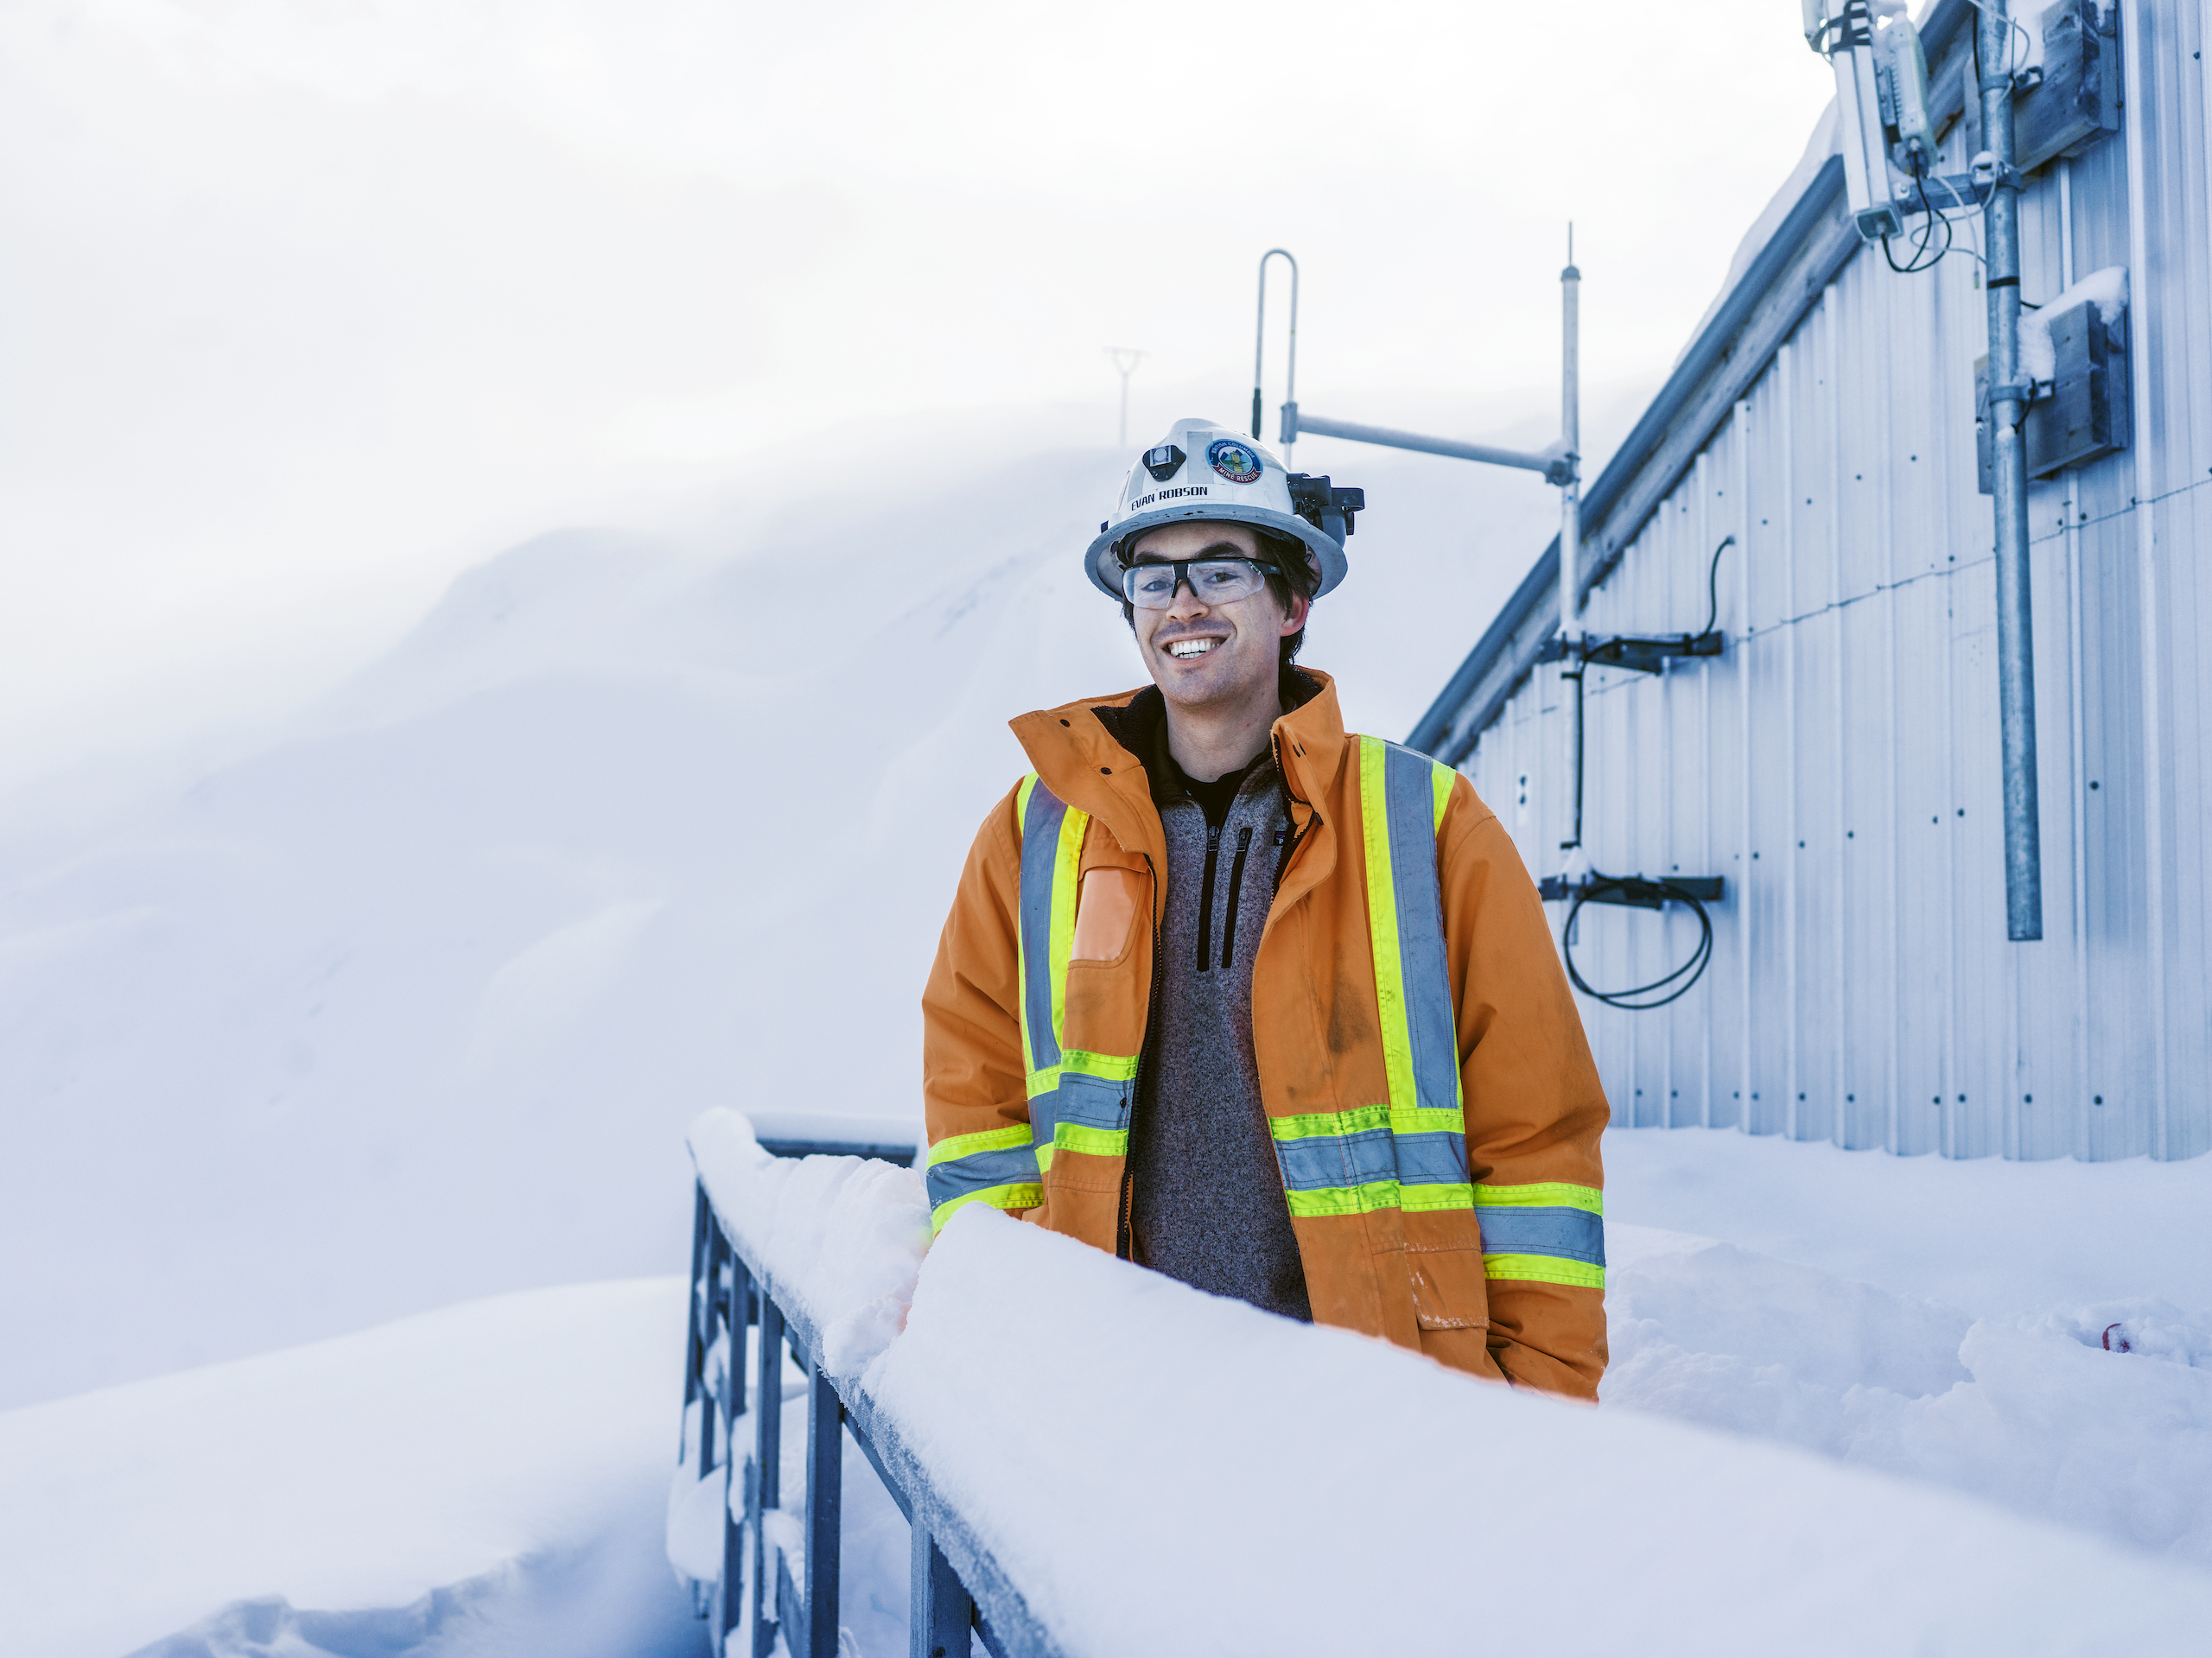 Planning Engineer Evan Robson is excited about the potential more battery-electrification has to improve productivity and working conditions at Brucejack.